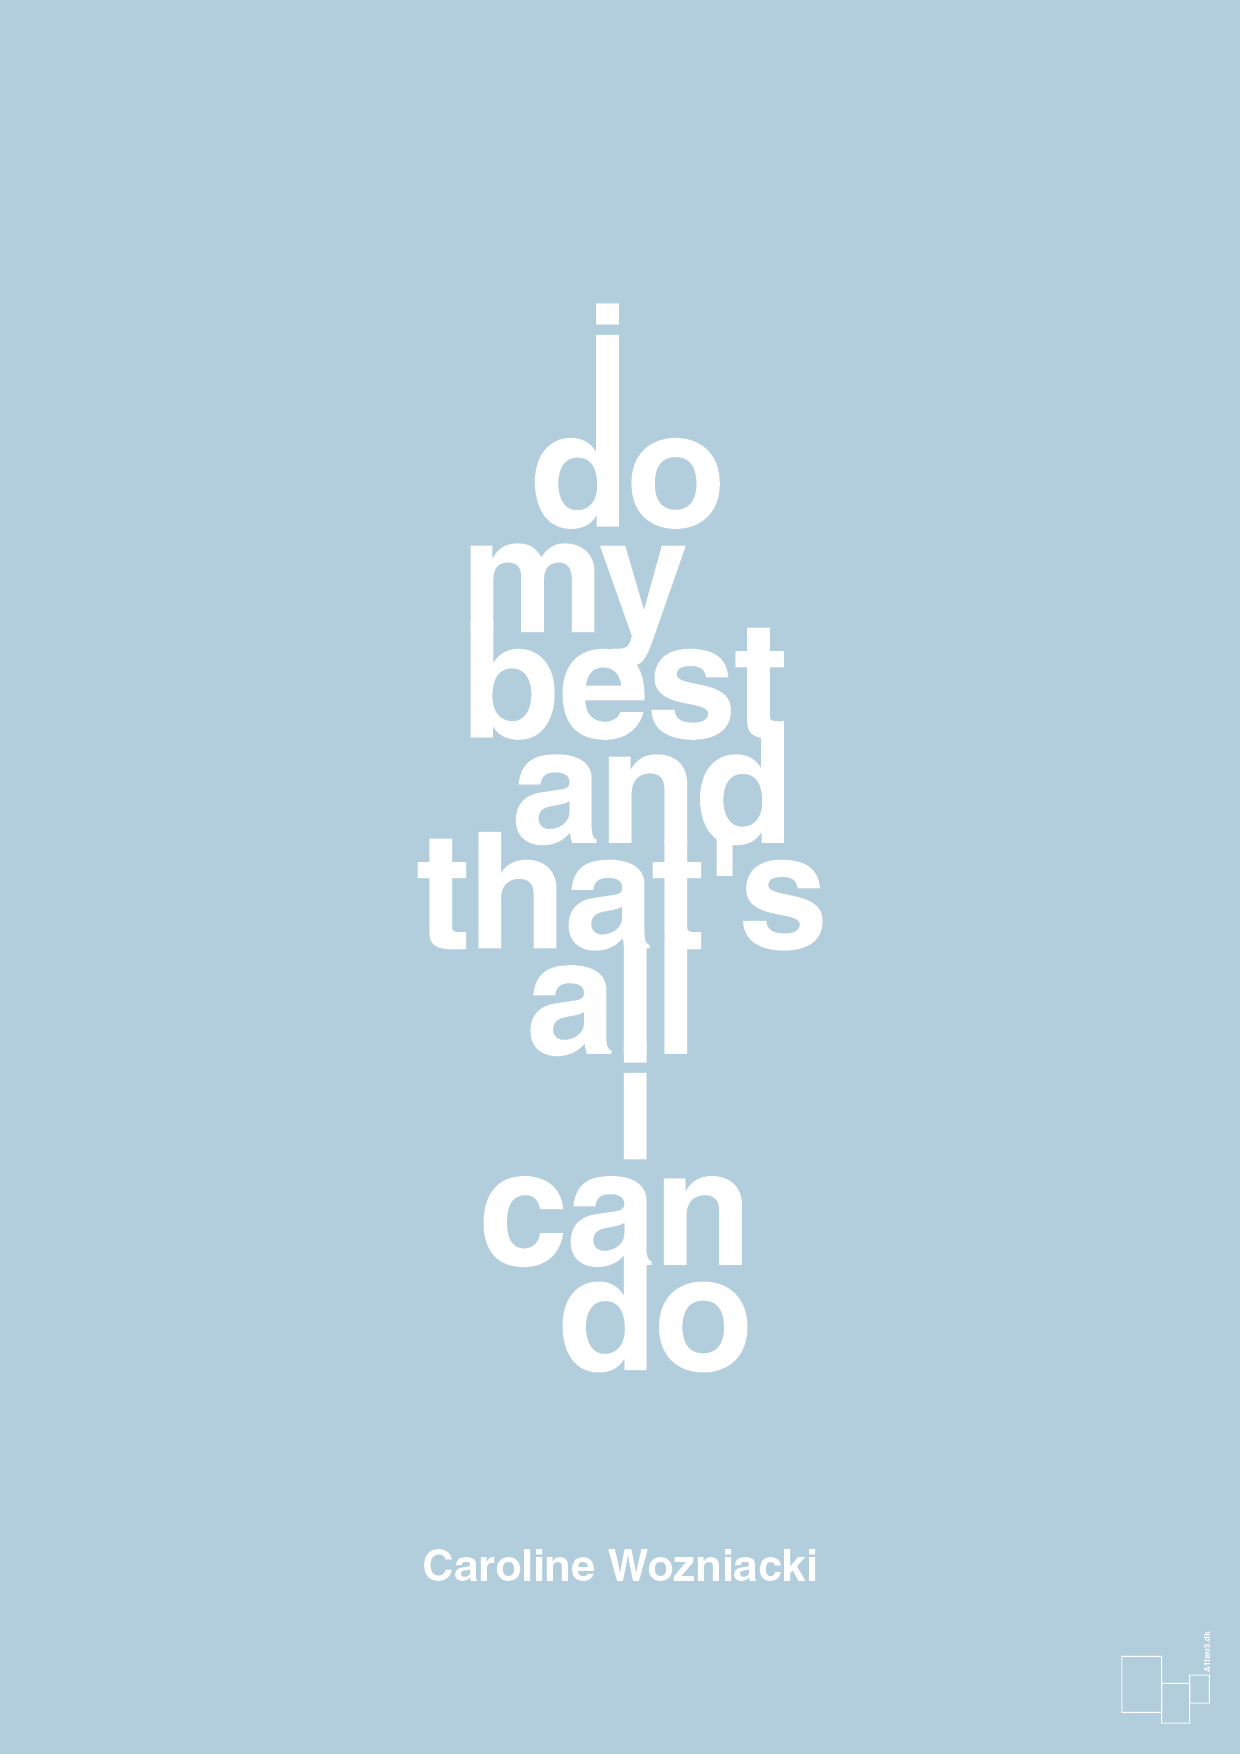 i do my best and that's all i can do - Plakat med Citater i Heavenly Blue